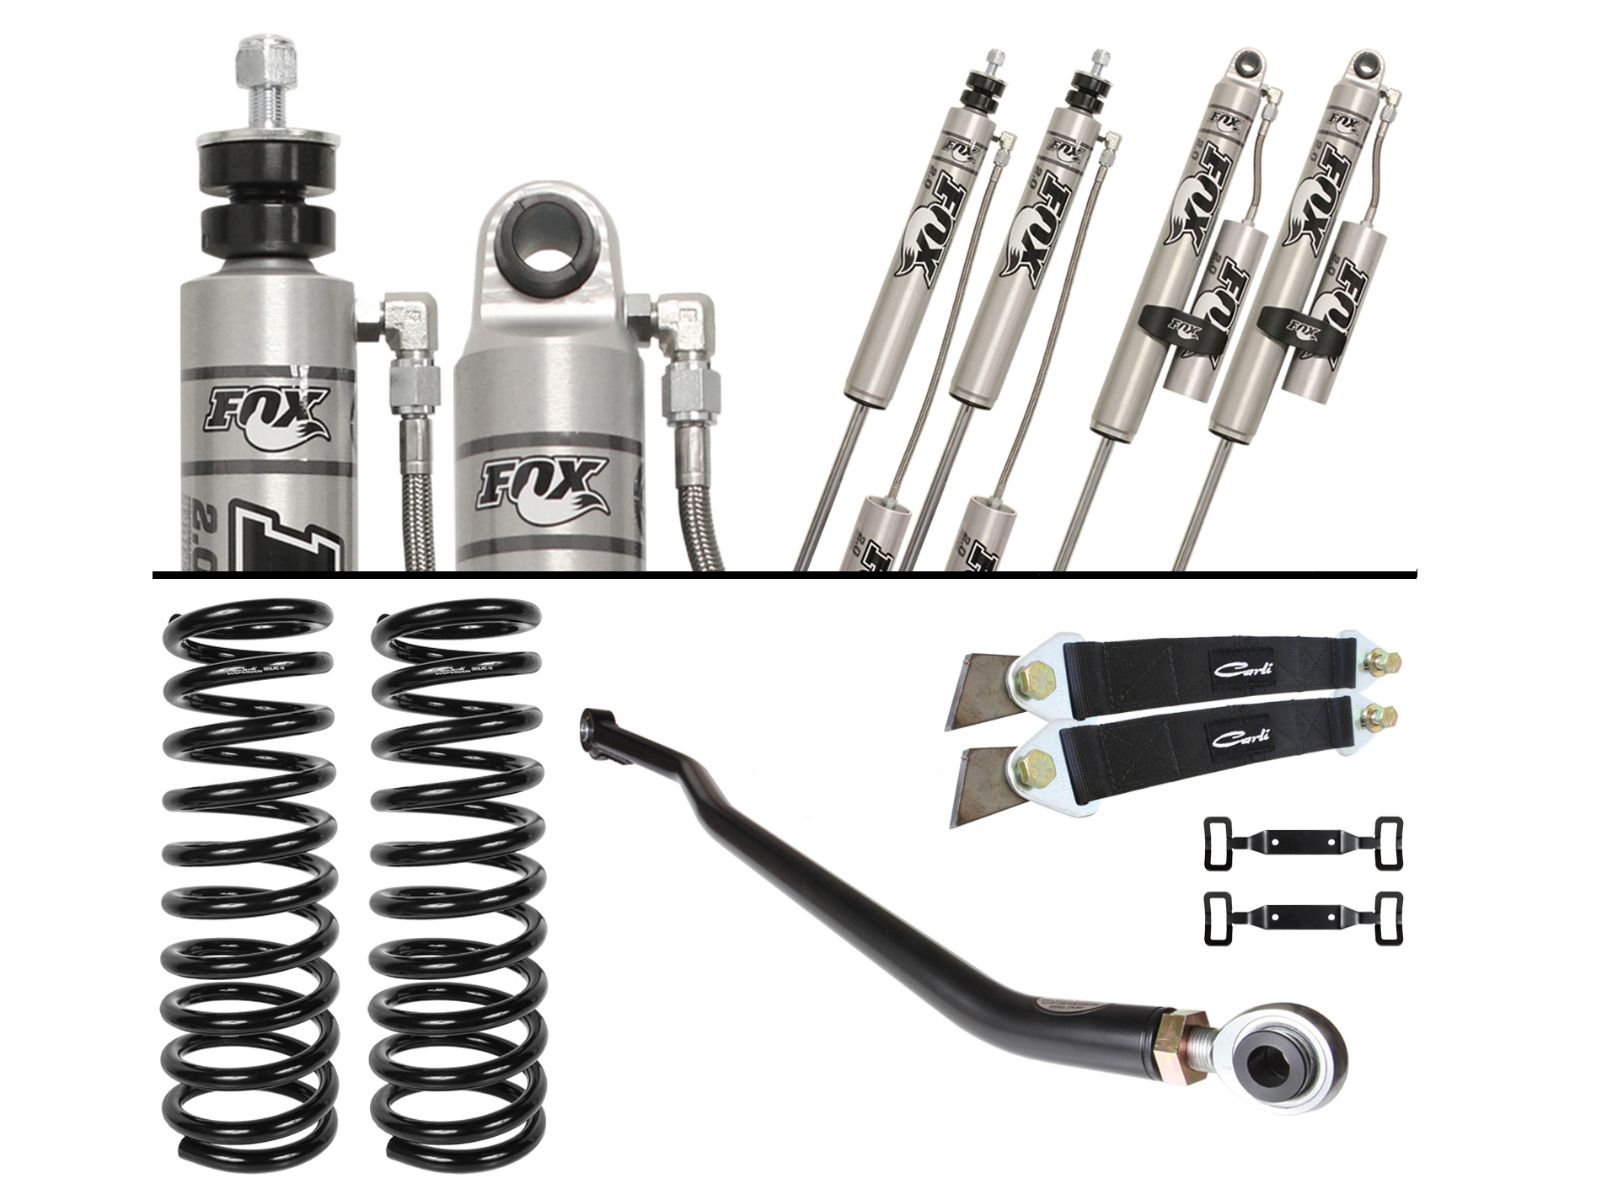 3" 2010-2013 Dodge Ram 2500 4wd (w/Diesel Engine) Backcountry Lift System by Carli Suspension